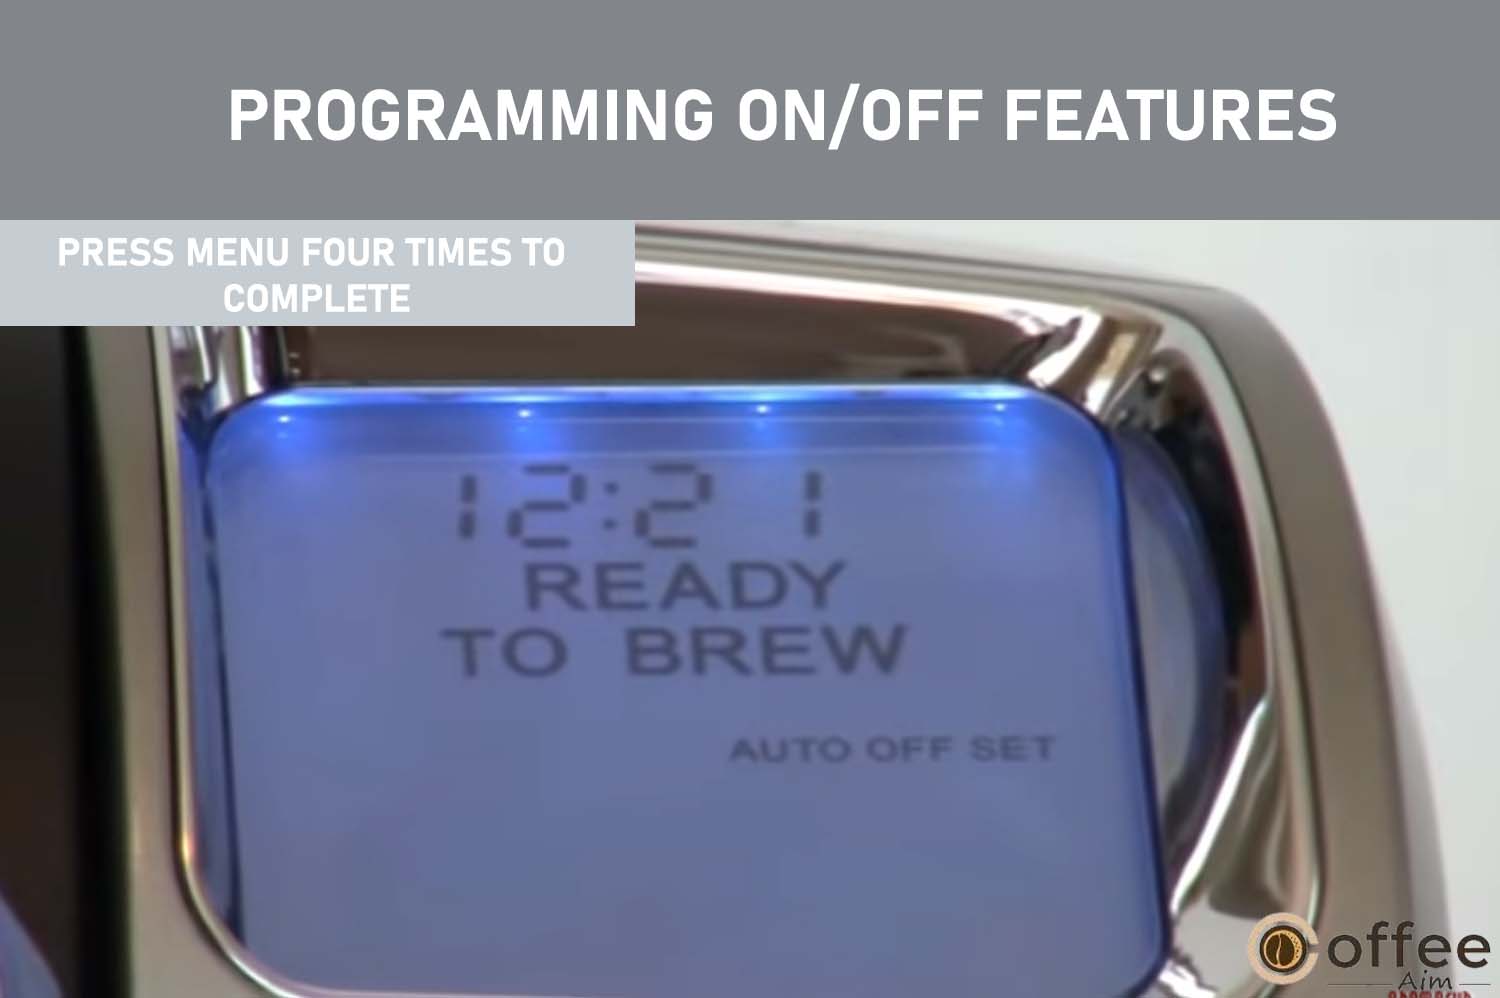 After choosing your desired Auto Off time, press the MENU Button four times to navigate other programming options and exit programming mode. The display will show "AUTO OFFSET," confirming the successful configuration.